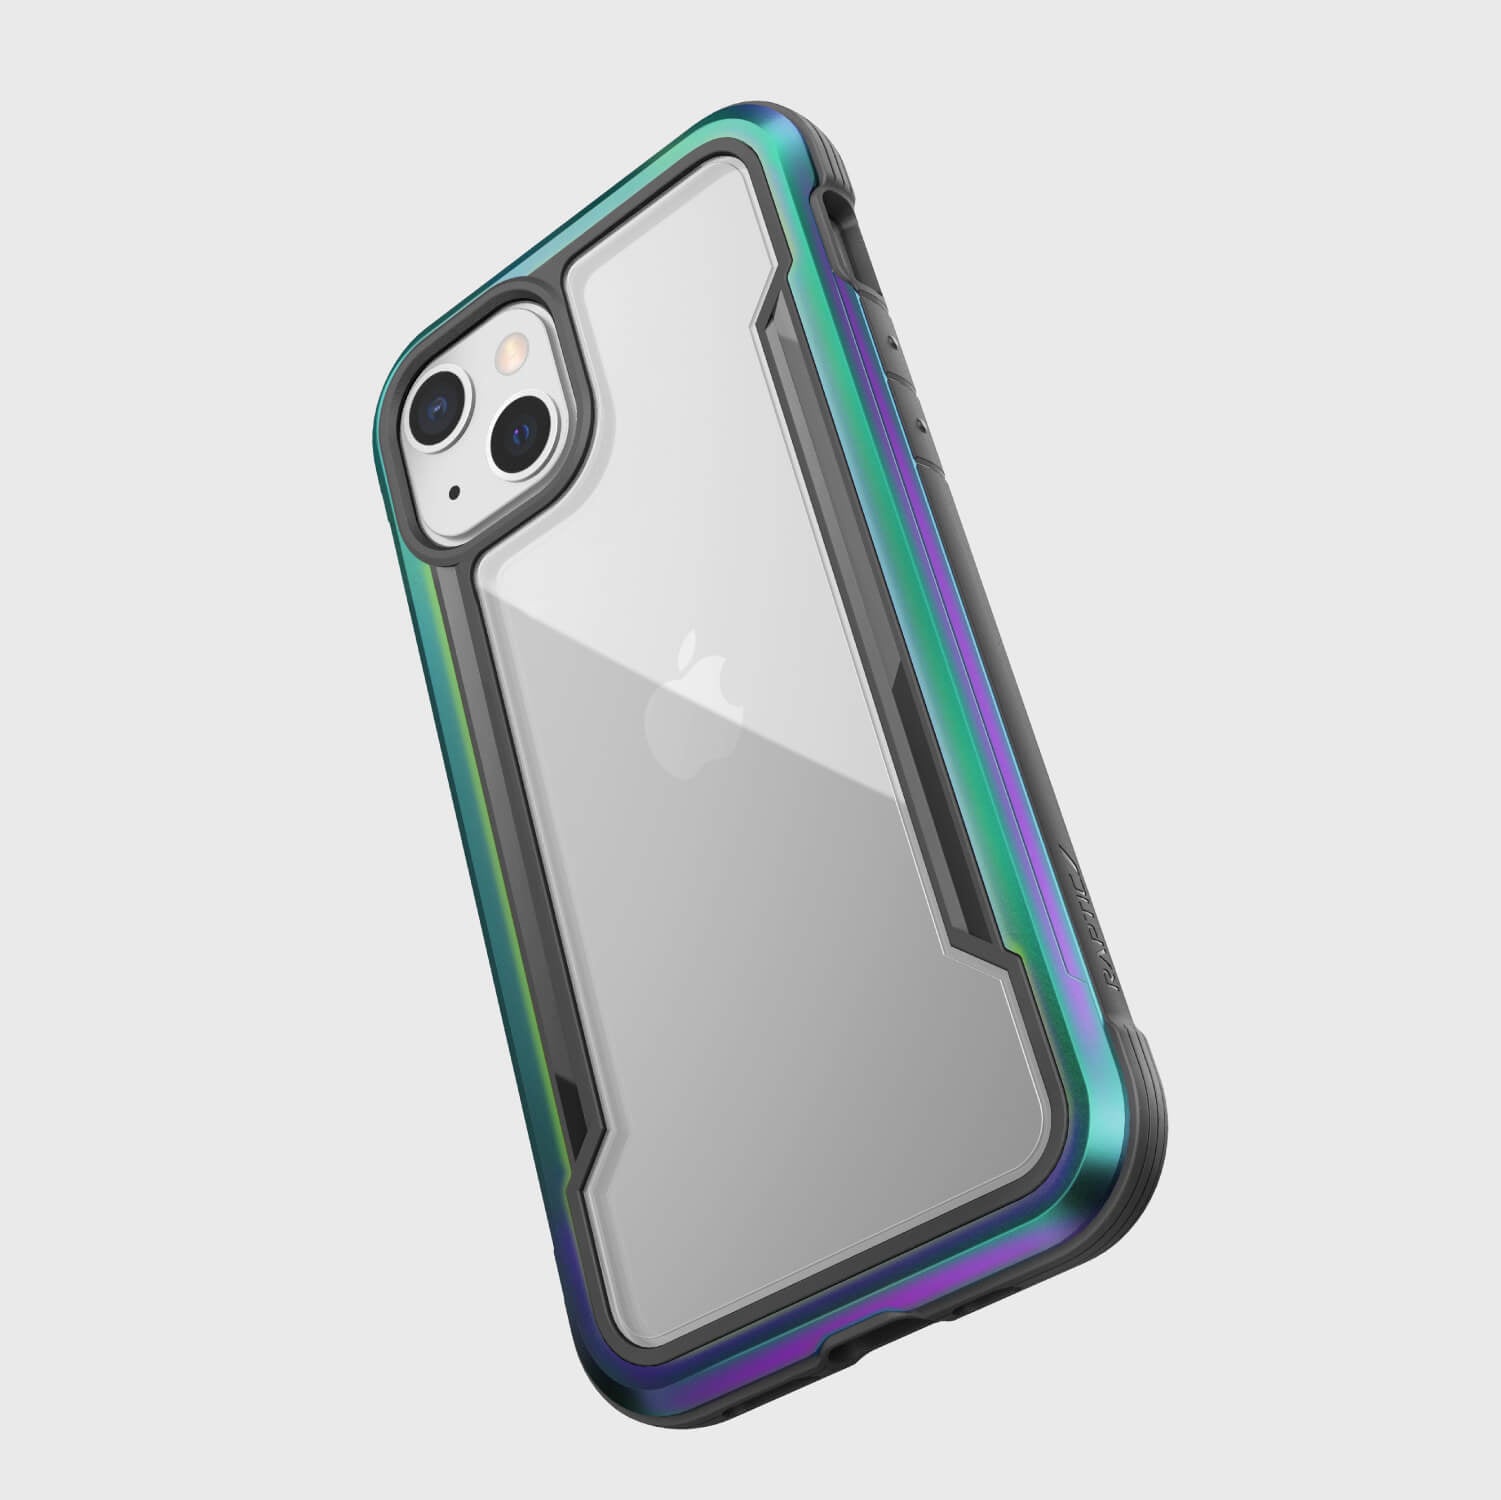 The Raptic iPhone 13 Case - SHIELD PRO offers drop protection with a vibrant rainbow colored back.